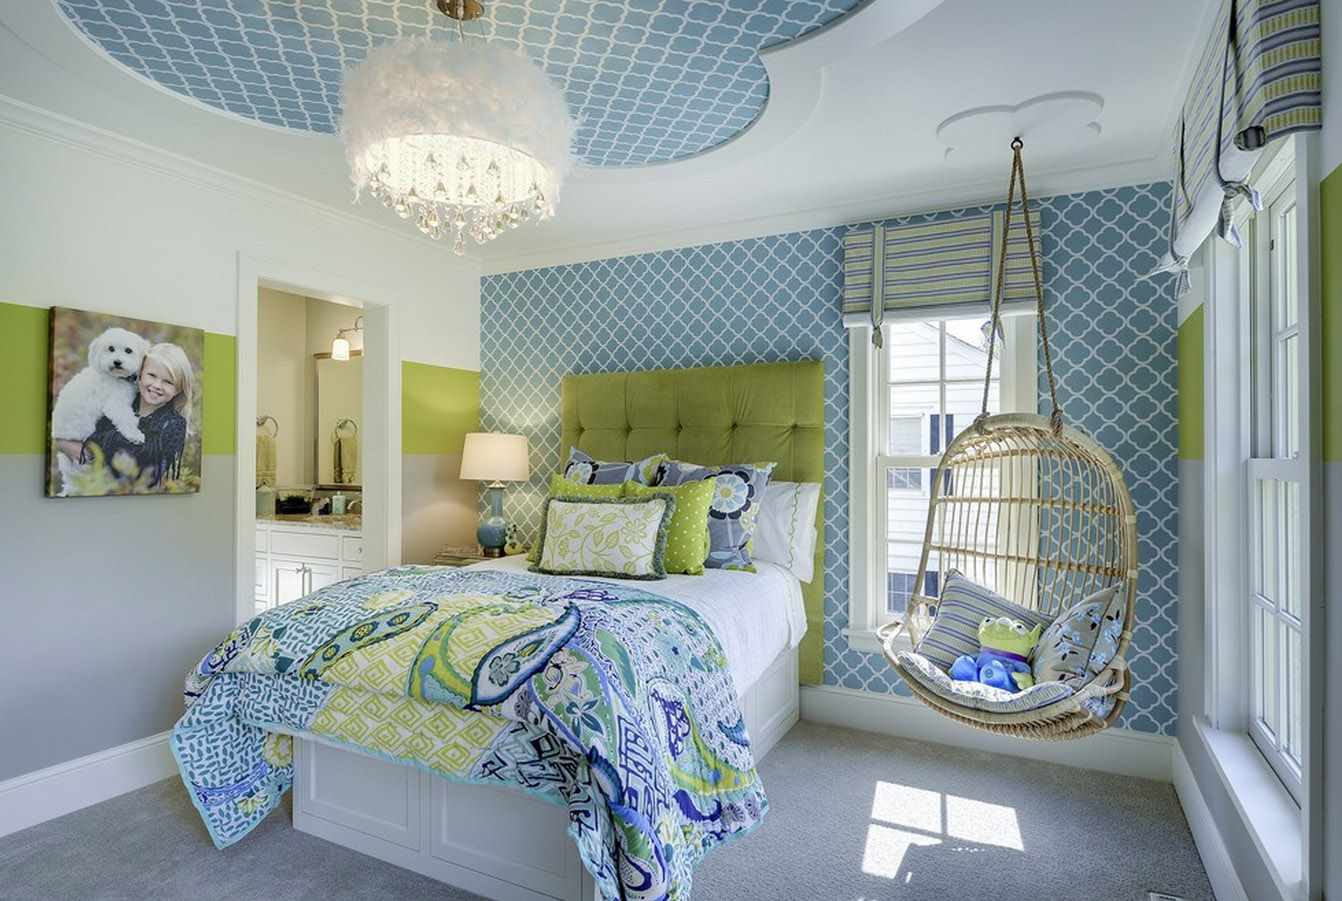 an example of a bright bedroom style